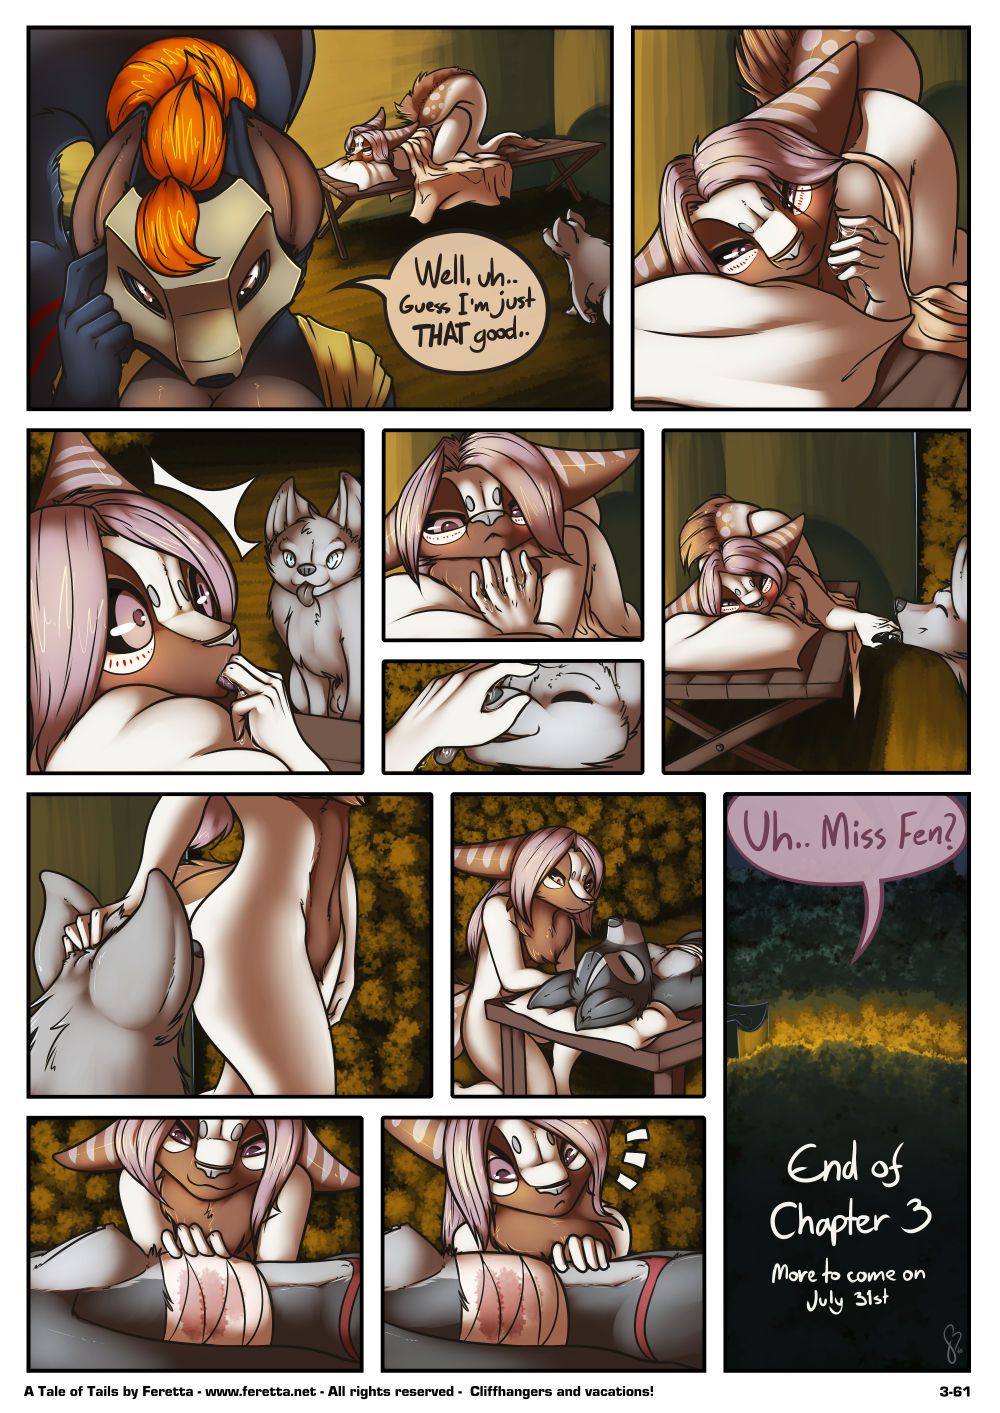 [Feretta] Farellian Legends: A Tale of Tails (w/Extras) [Ongoing] 150